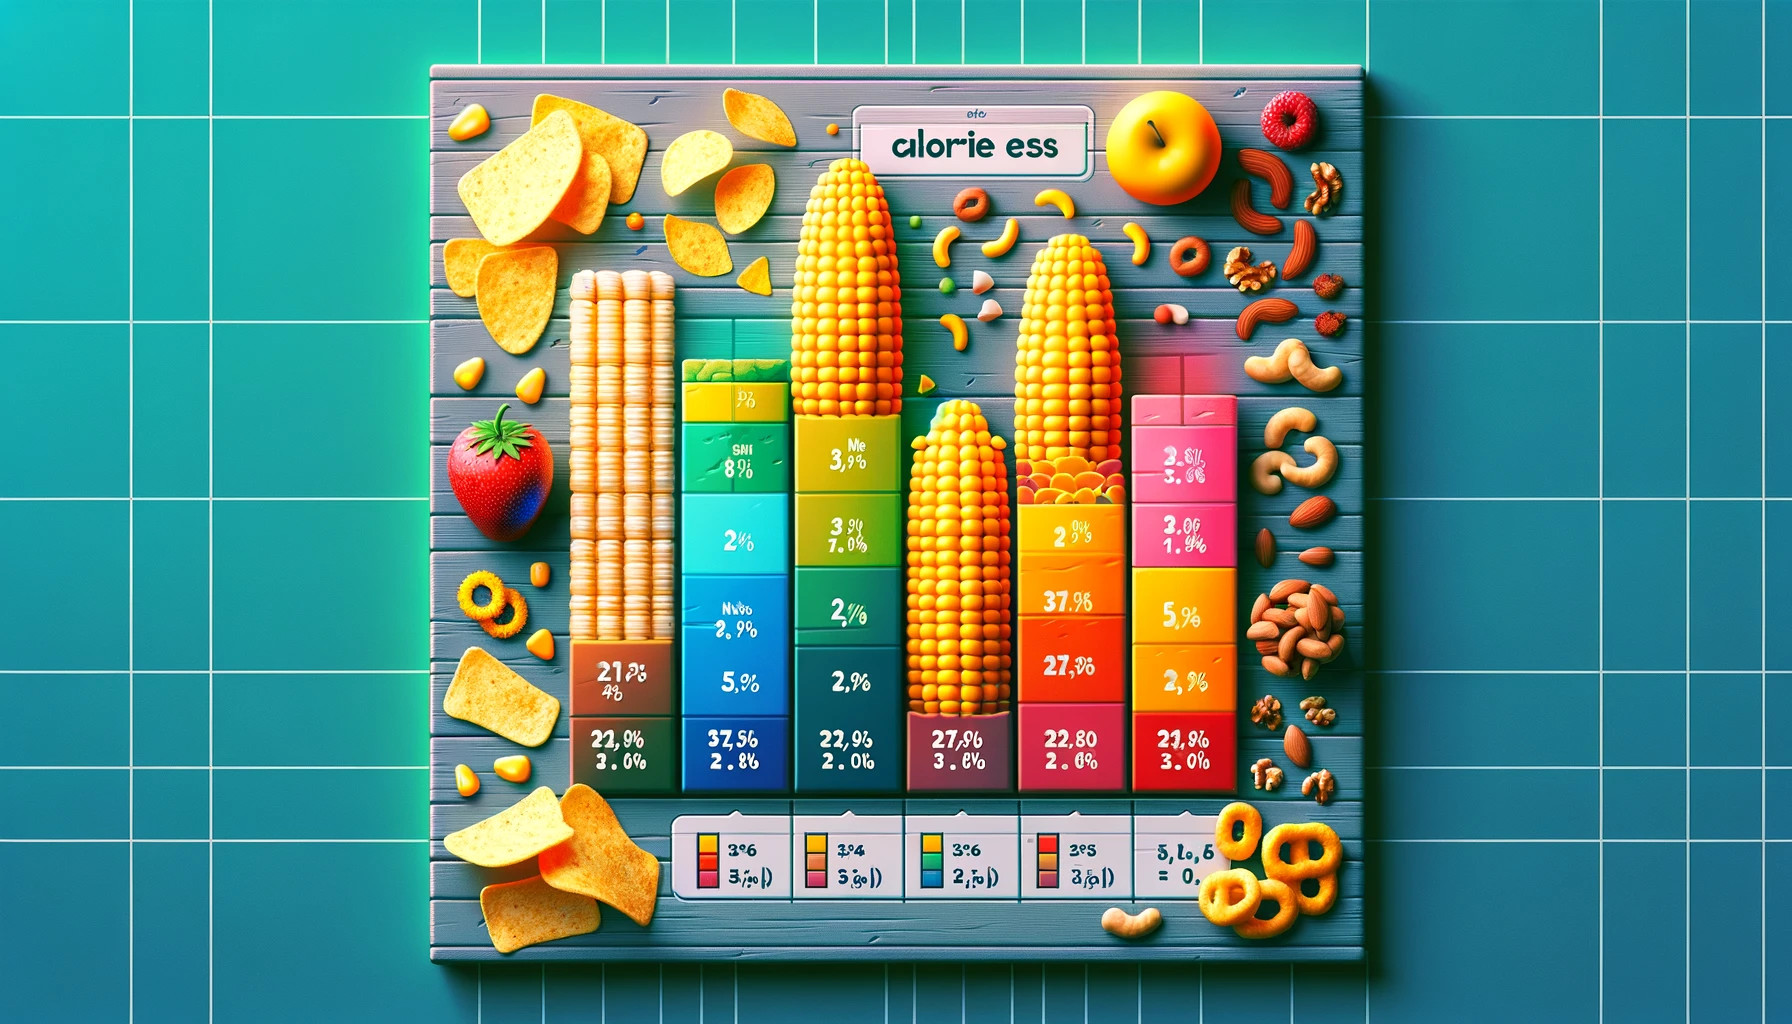 bar graph comparing the calorie counts of different snack options, with corn on the cob as the lowest calorie choice.